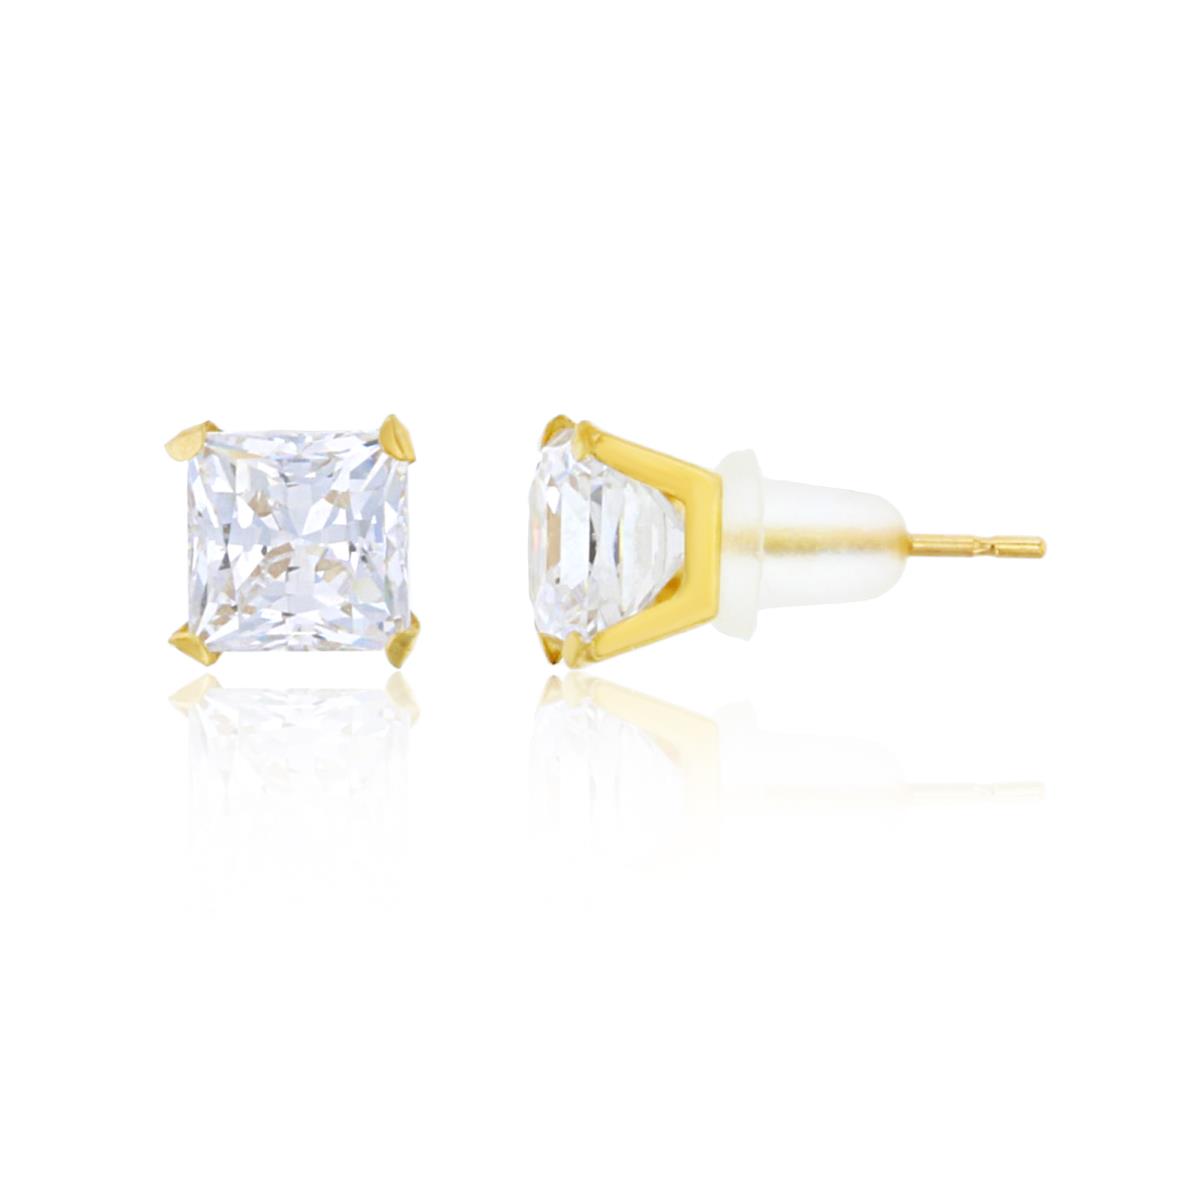 14K Yellow Gold 4.00mm 4-Prong Princess Cut Solitaire Stud & 14K Silicone Back